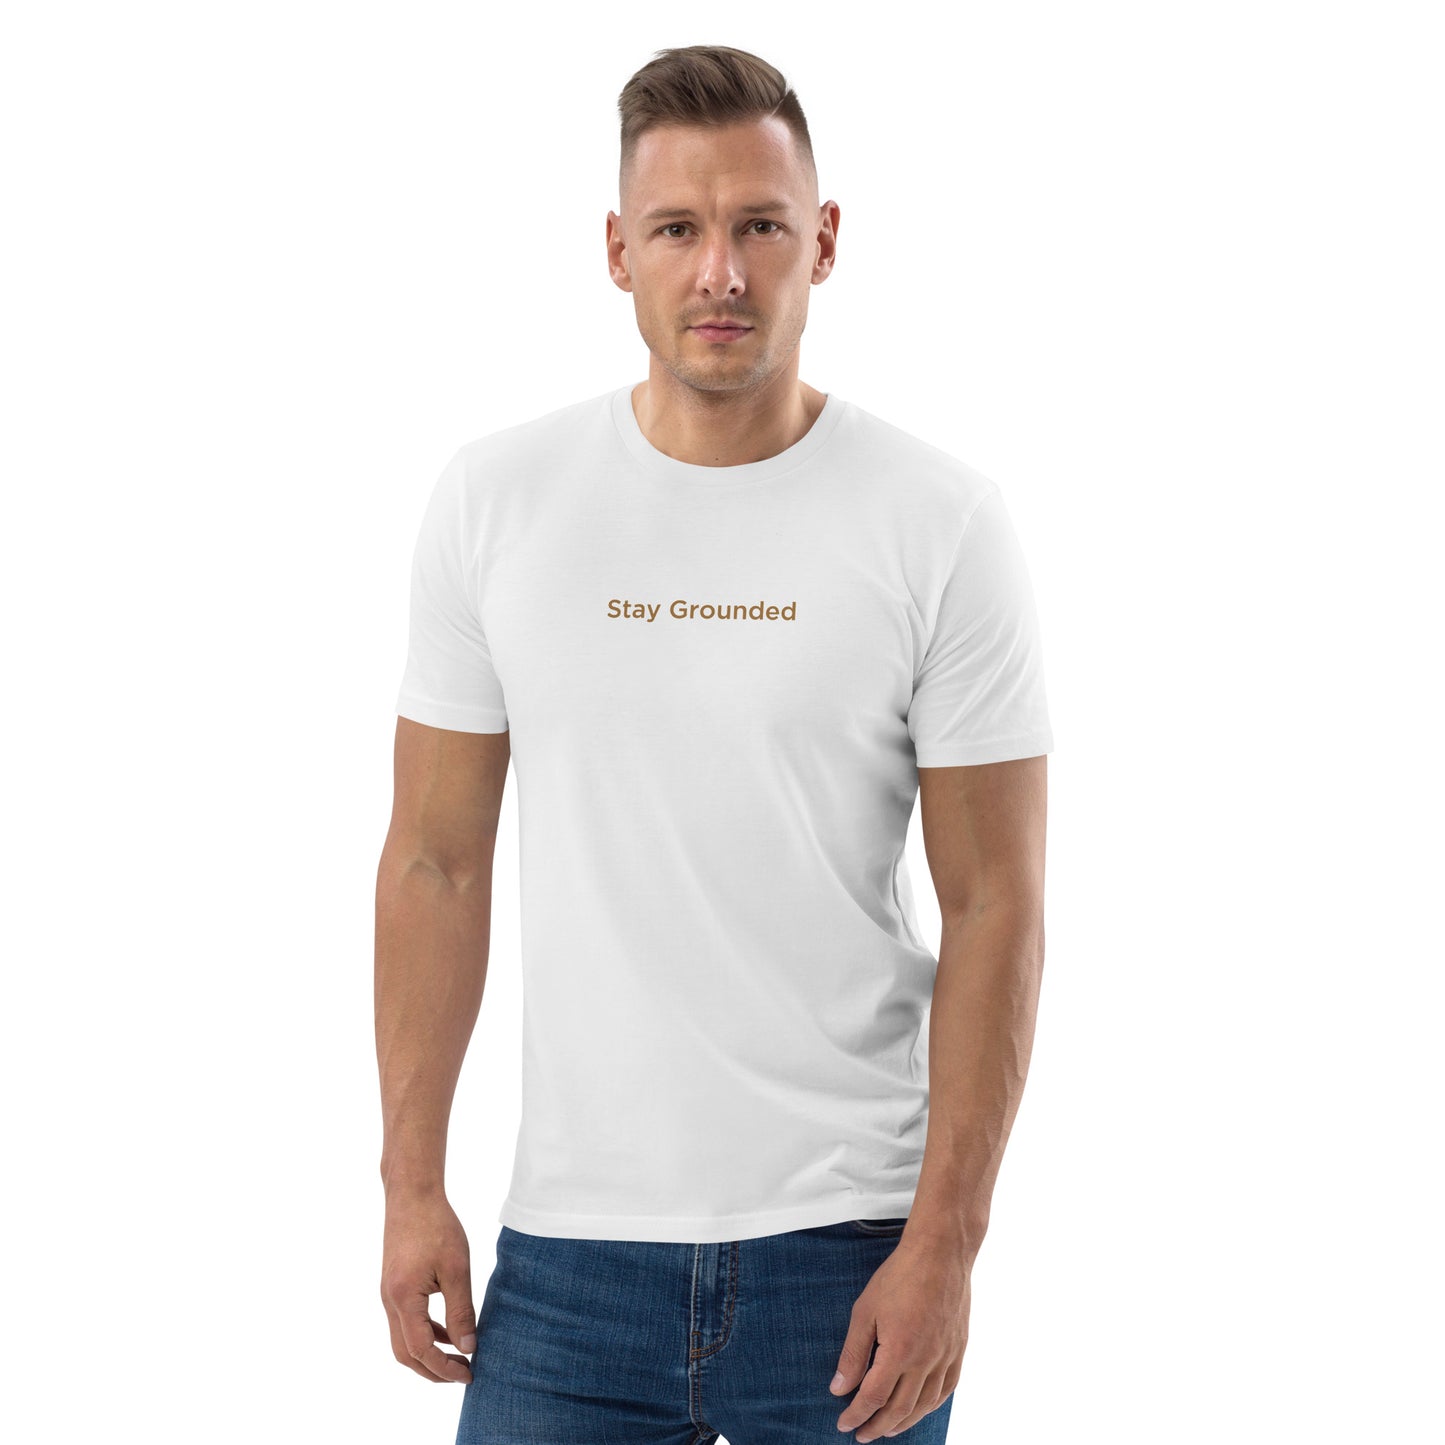 Stay Grounded Men's 100% Organic Cotton T-Shirt